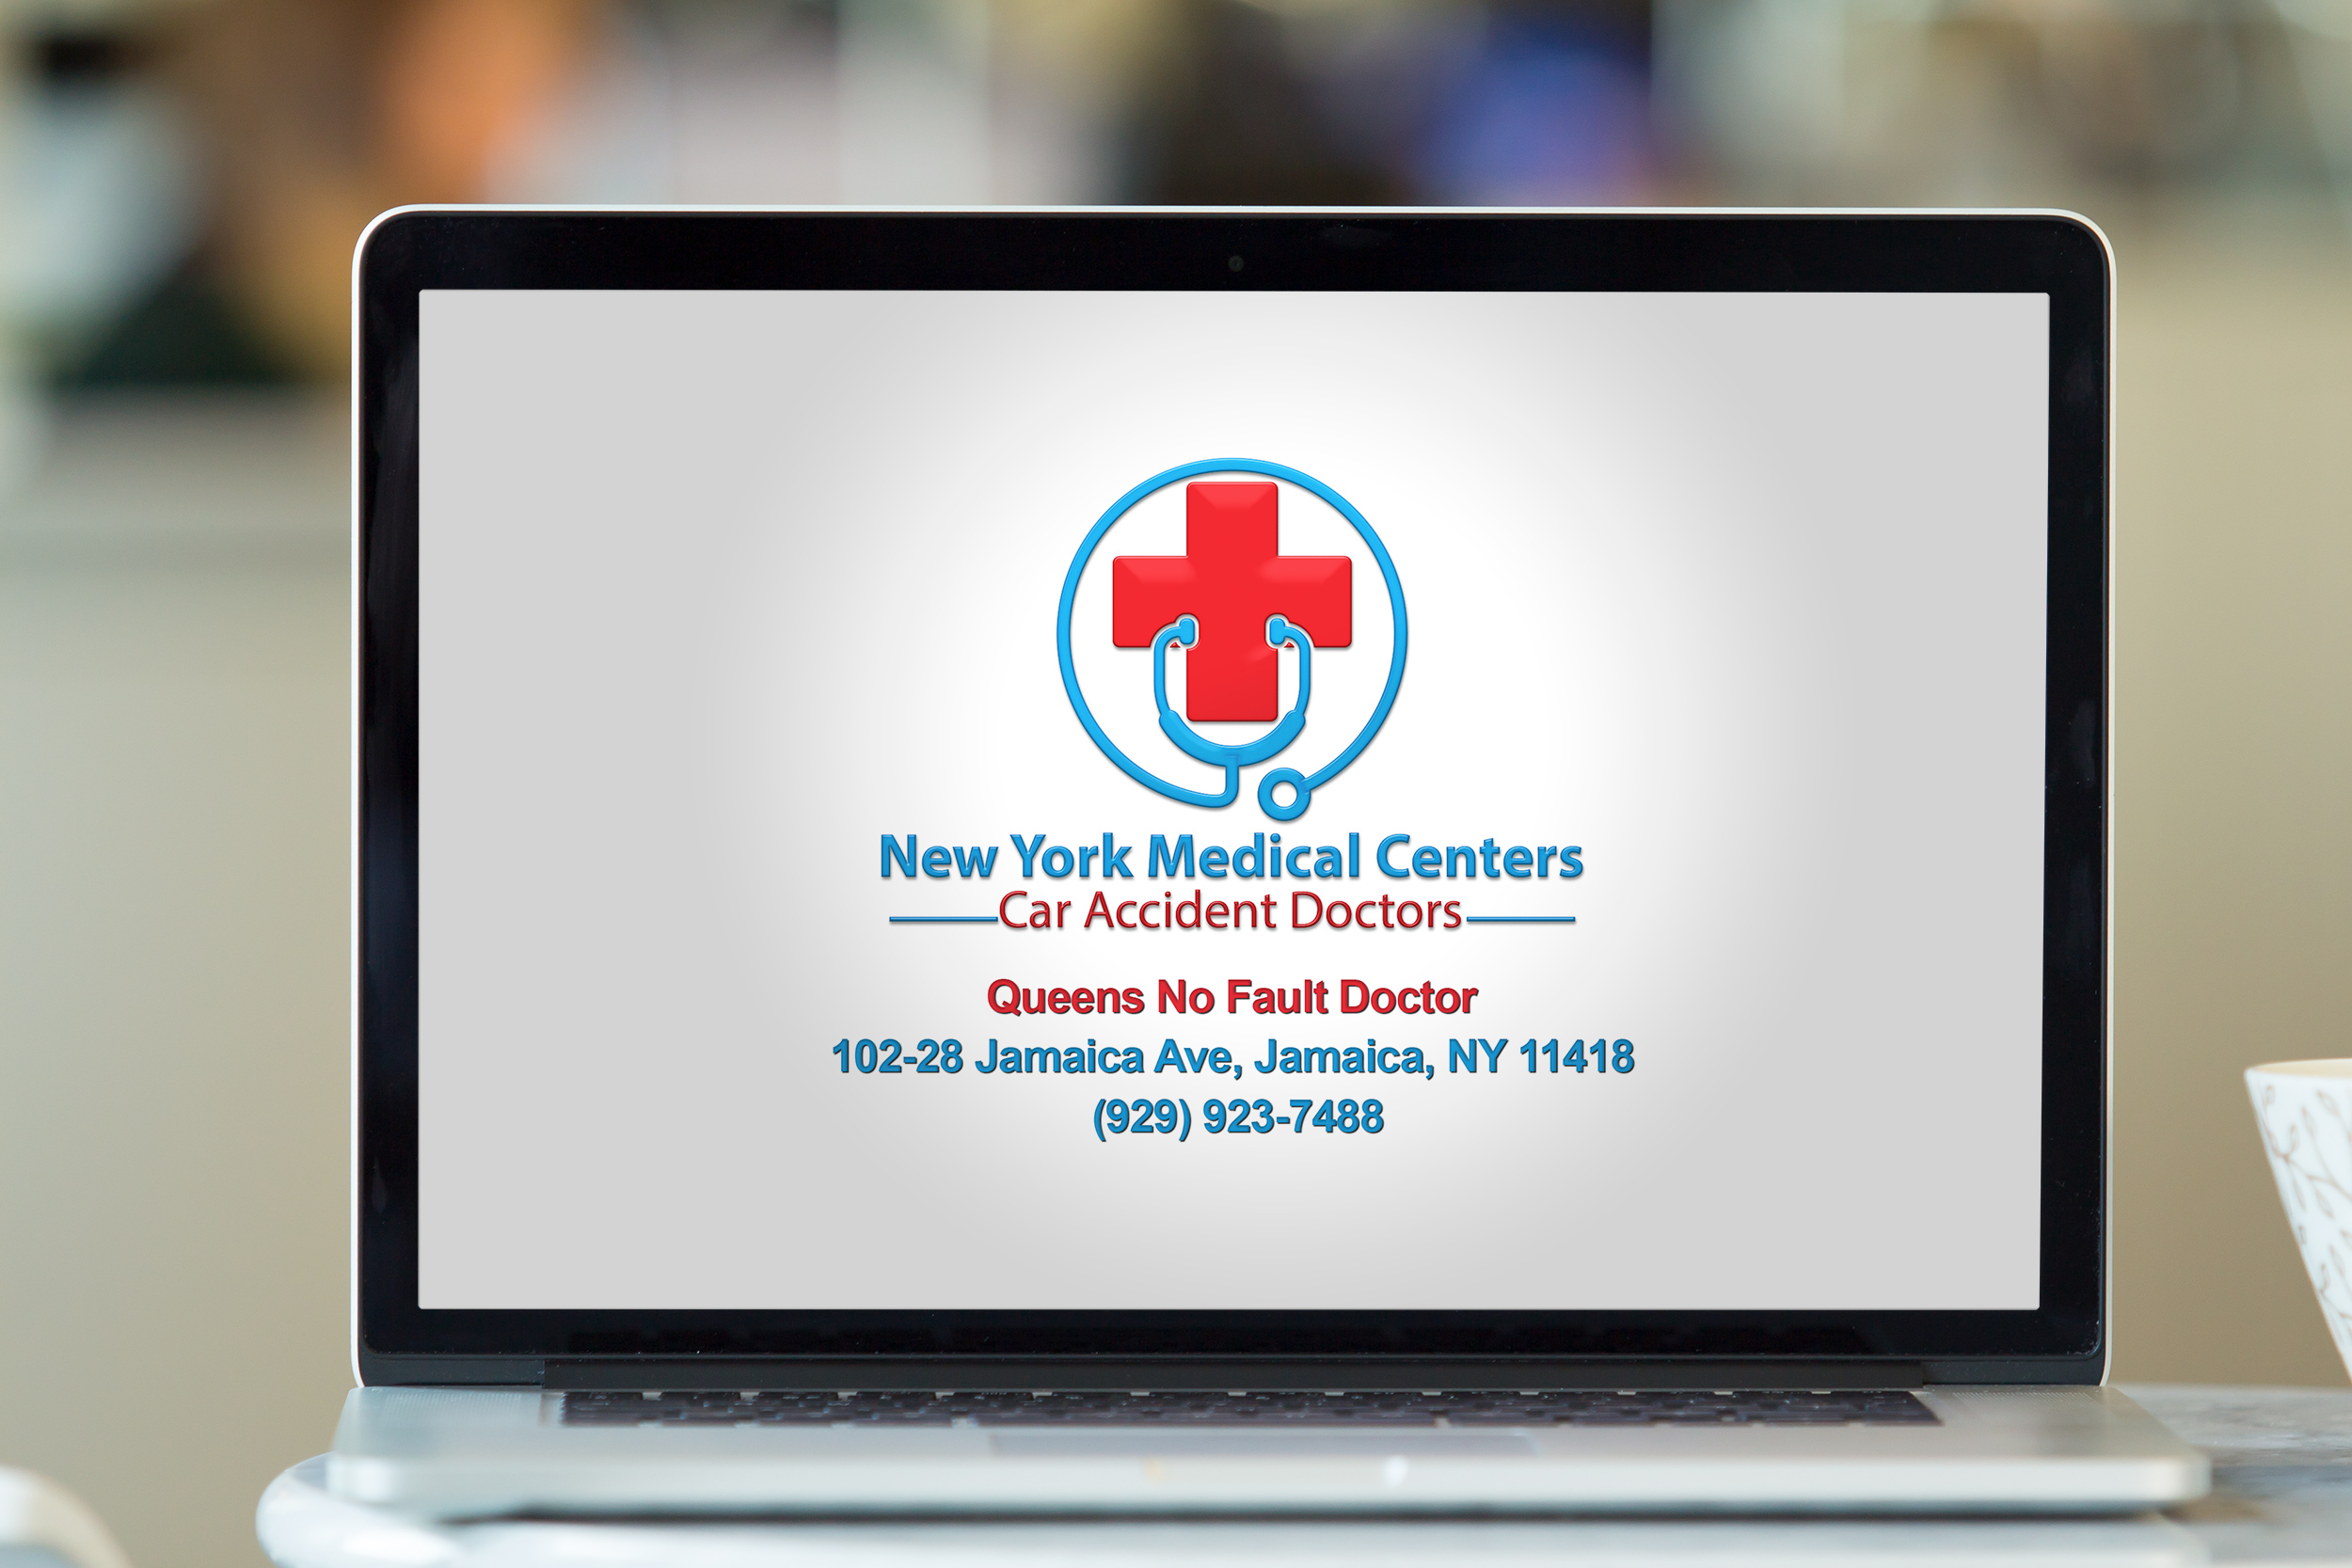 new york medical center - queens no fault doctor -workers compensation doctor